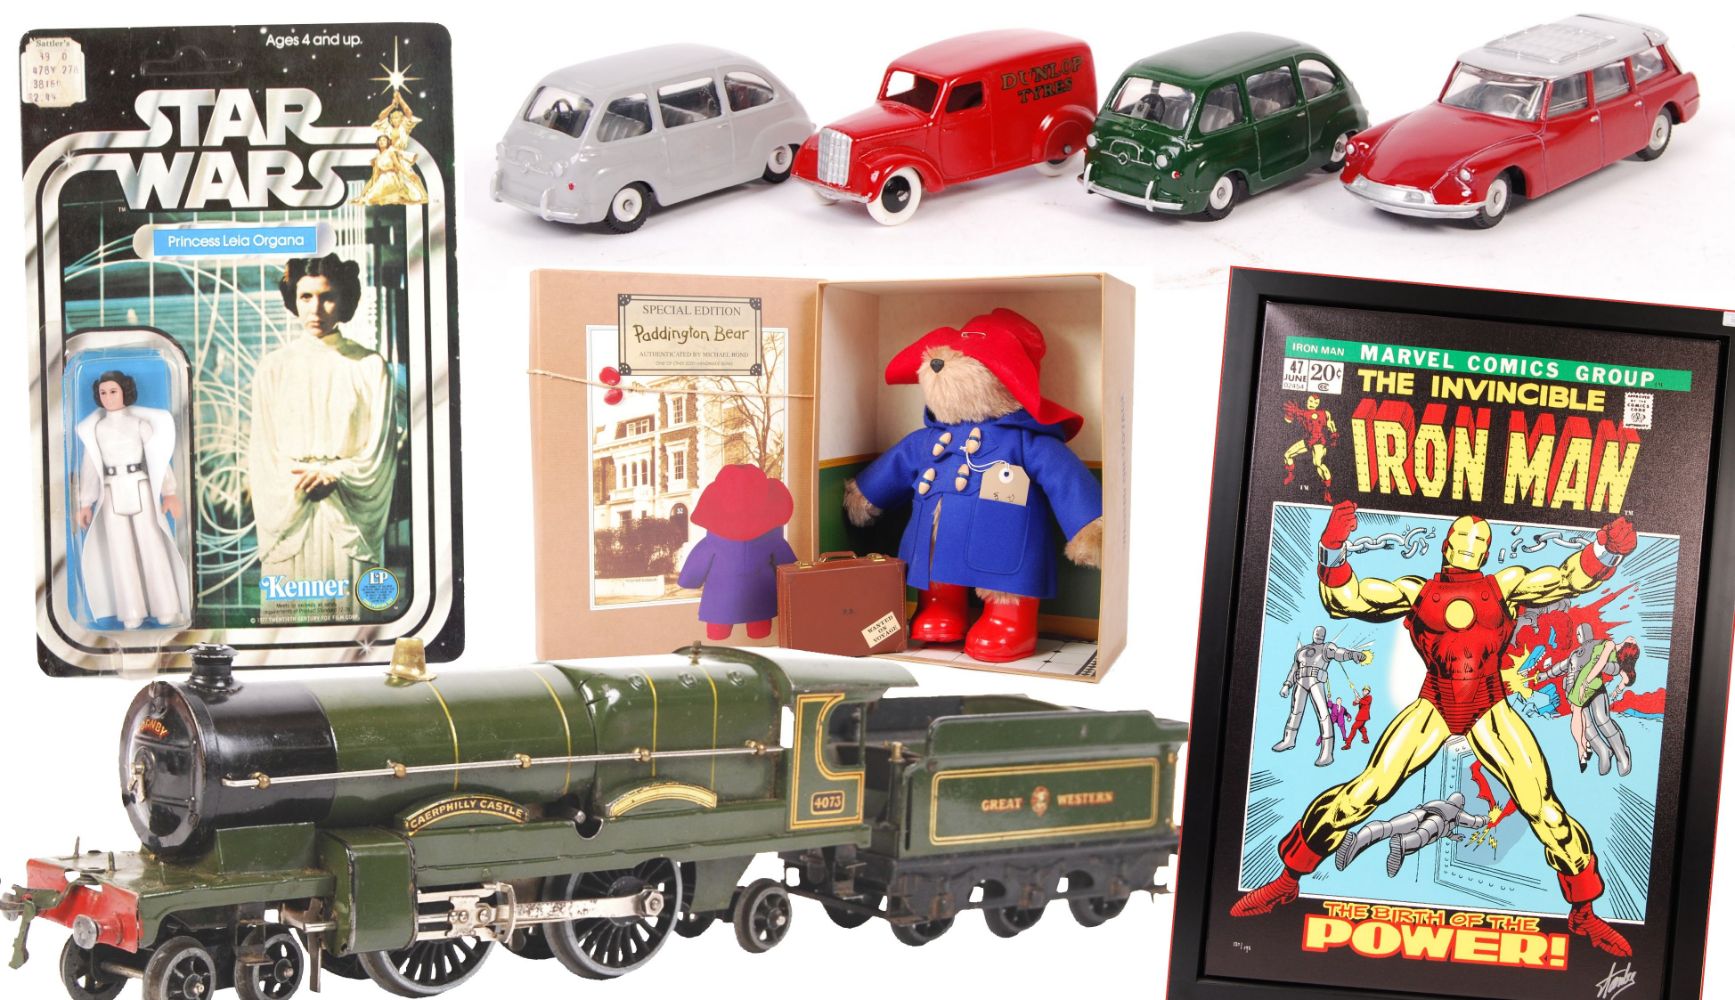 Online Toy Auction - Model Railway, Model Kits & Other Items